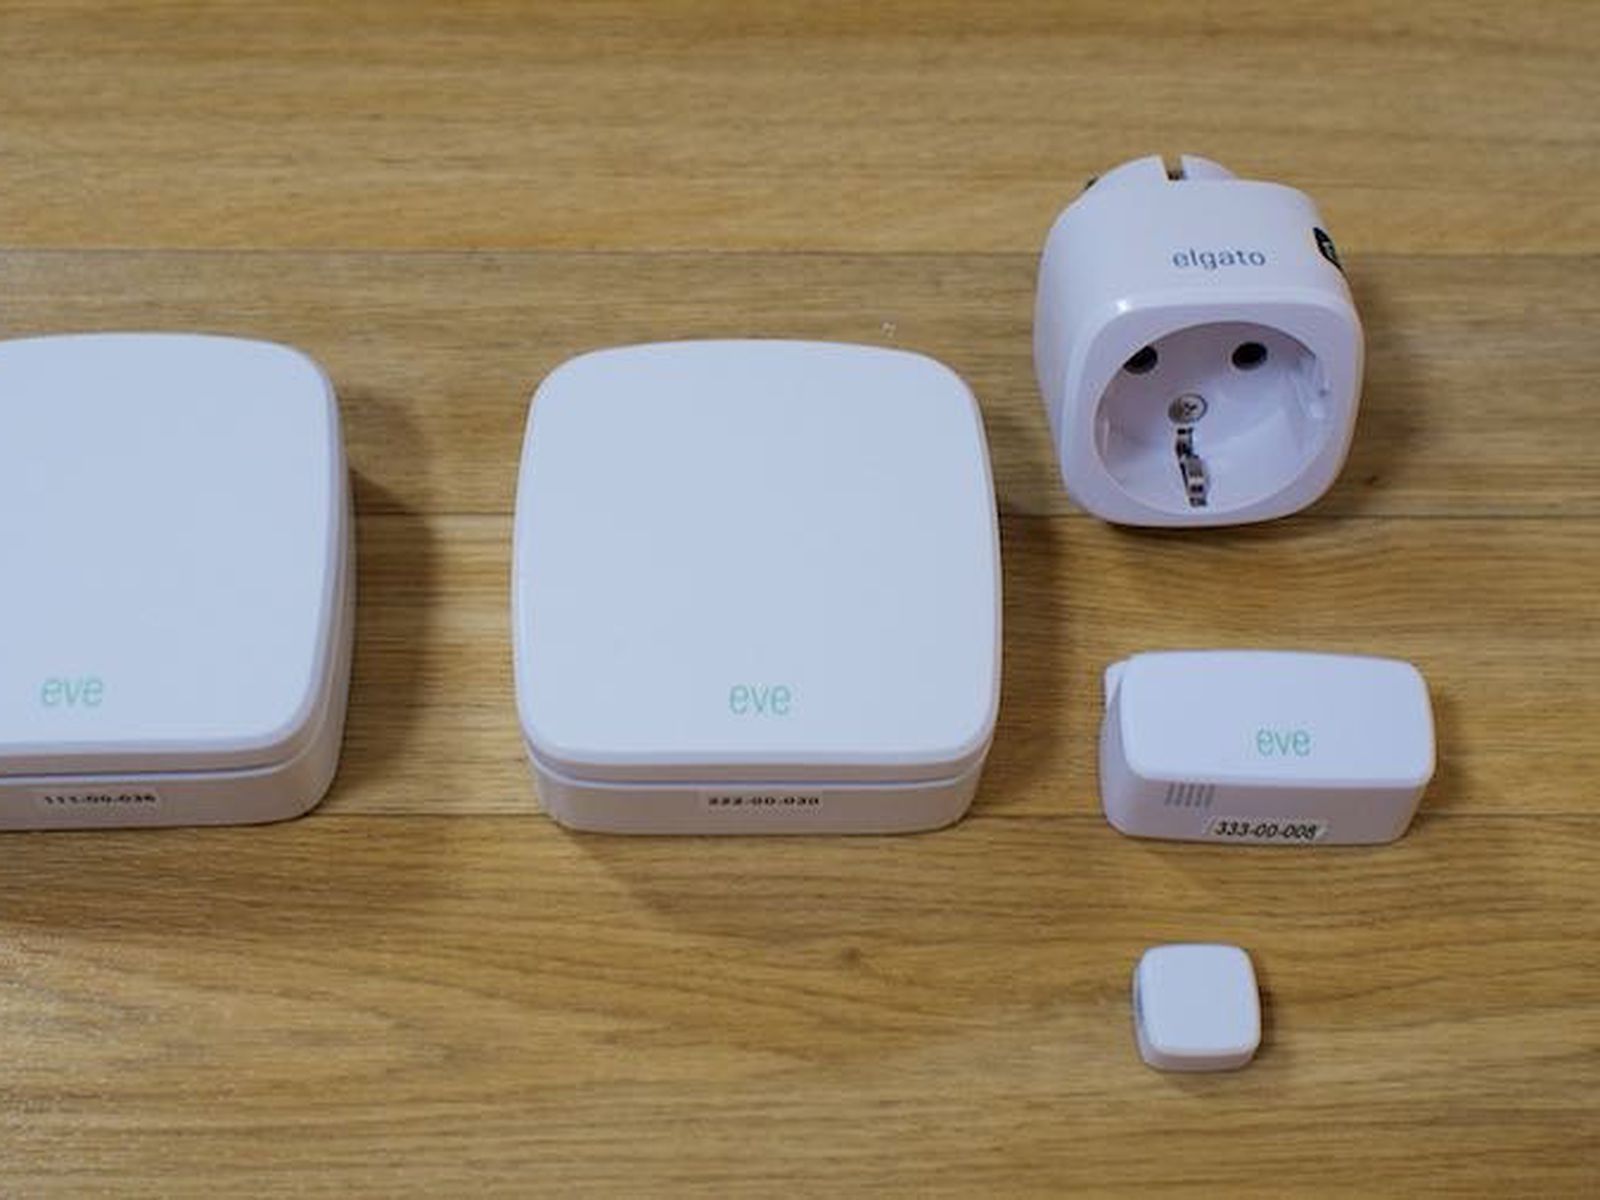 Elgato's 'Eve' Smart Home Accessories Are Useful, But Hampered by